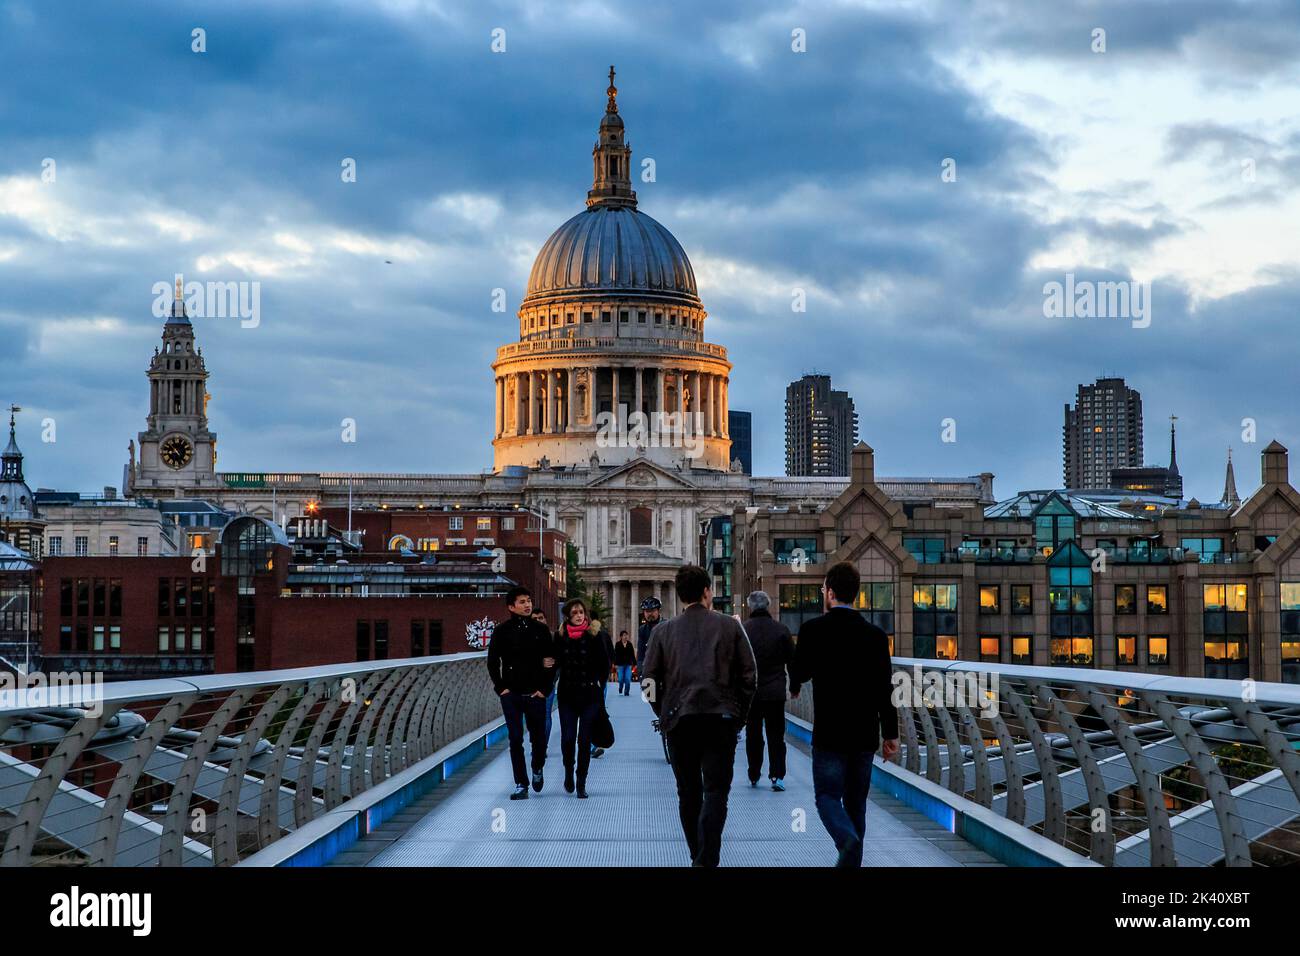 LONDON, GREAT BRITAIN - MAY 11, 2014: It is a view of St. Paul's Cathedral from the Millennium Bridge on a cloudy spring evening. Stock Photo